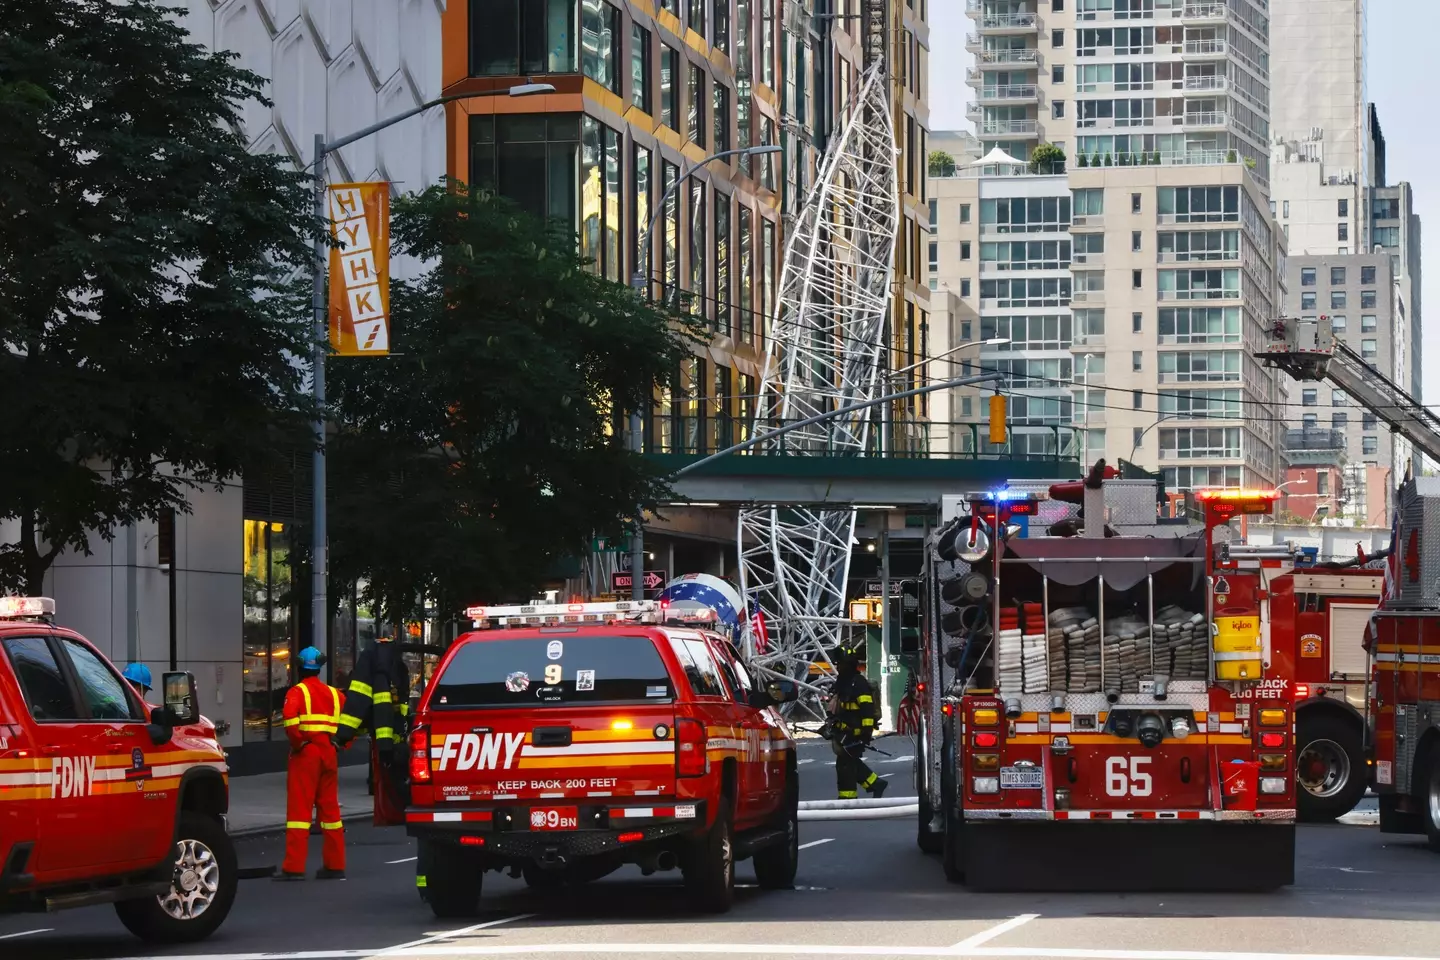 The long arm of a crane fell onto the streets of New York after a serious fire.